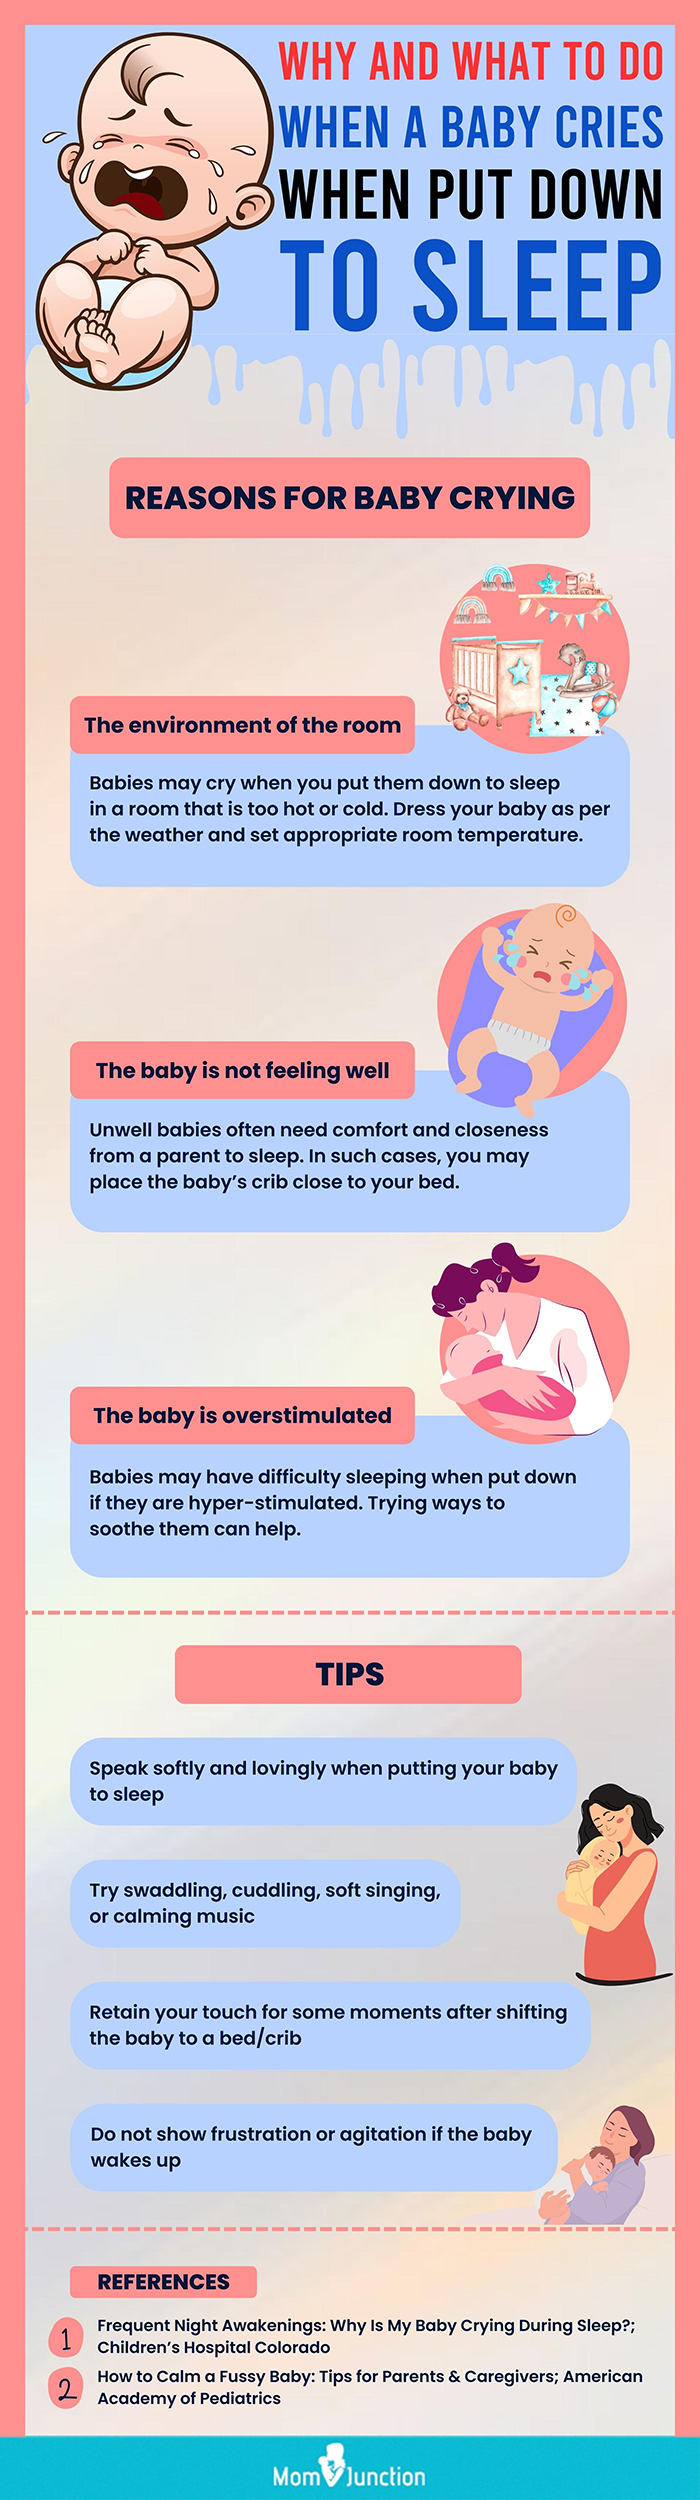 what to do when baby cries when put down to sleep [infographic]